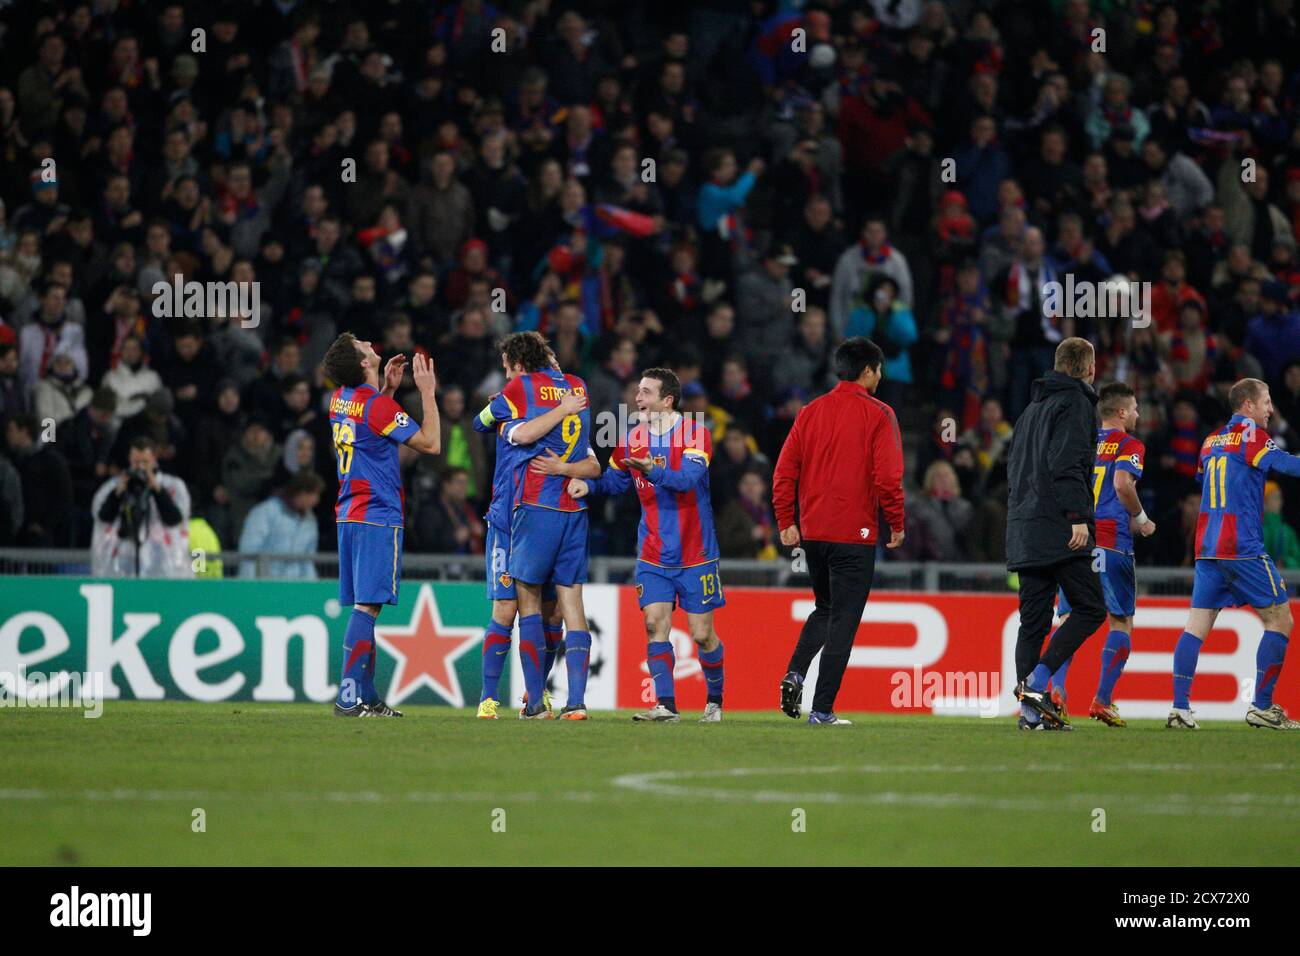 FC Basel (FCB) players including (L-R) David Abraham, Marco Streller and  Alexander Frei celebrate at the end of their Champions League Group C  soccer match against Manchester United in Basel, December 7,